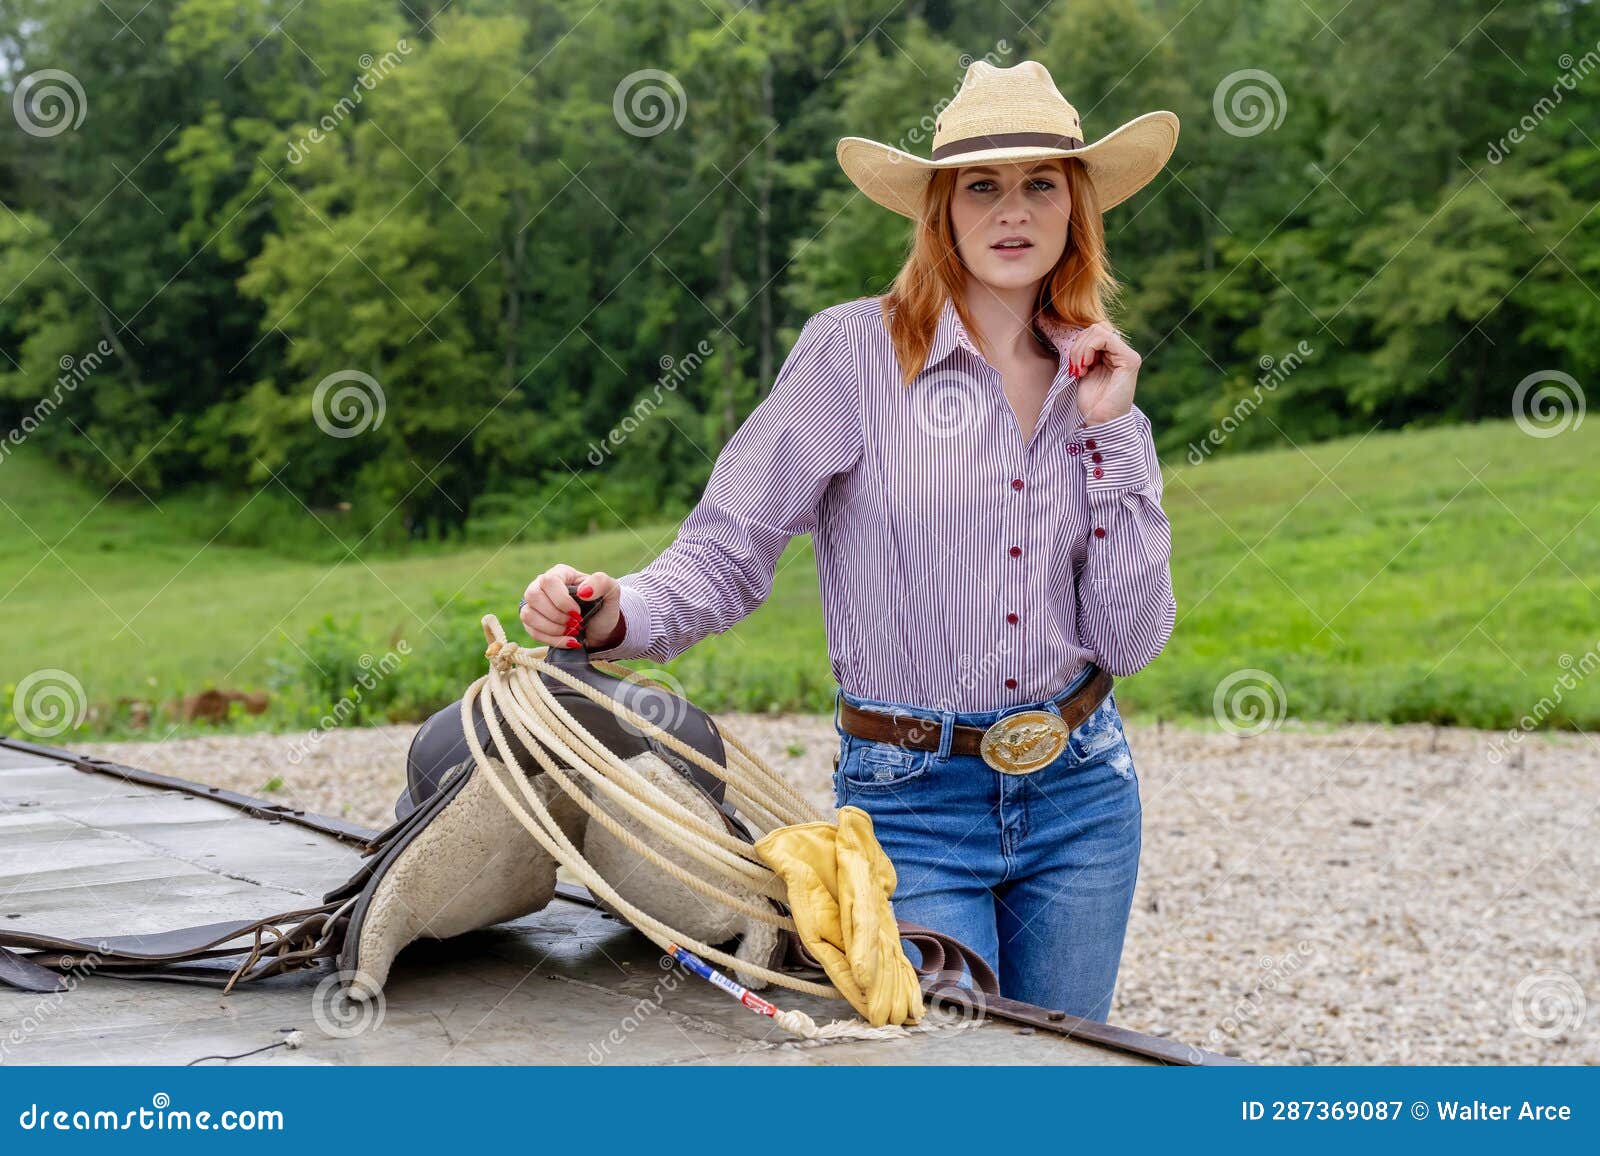 A Lovely Red Headed Country Wetern Model Poses Outdoors in a Country ...